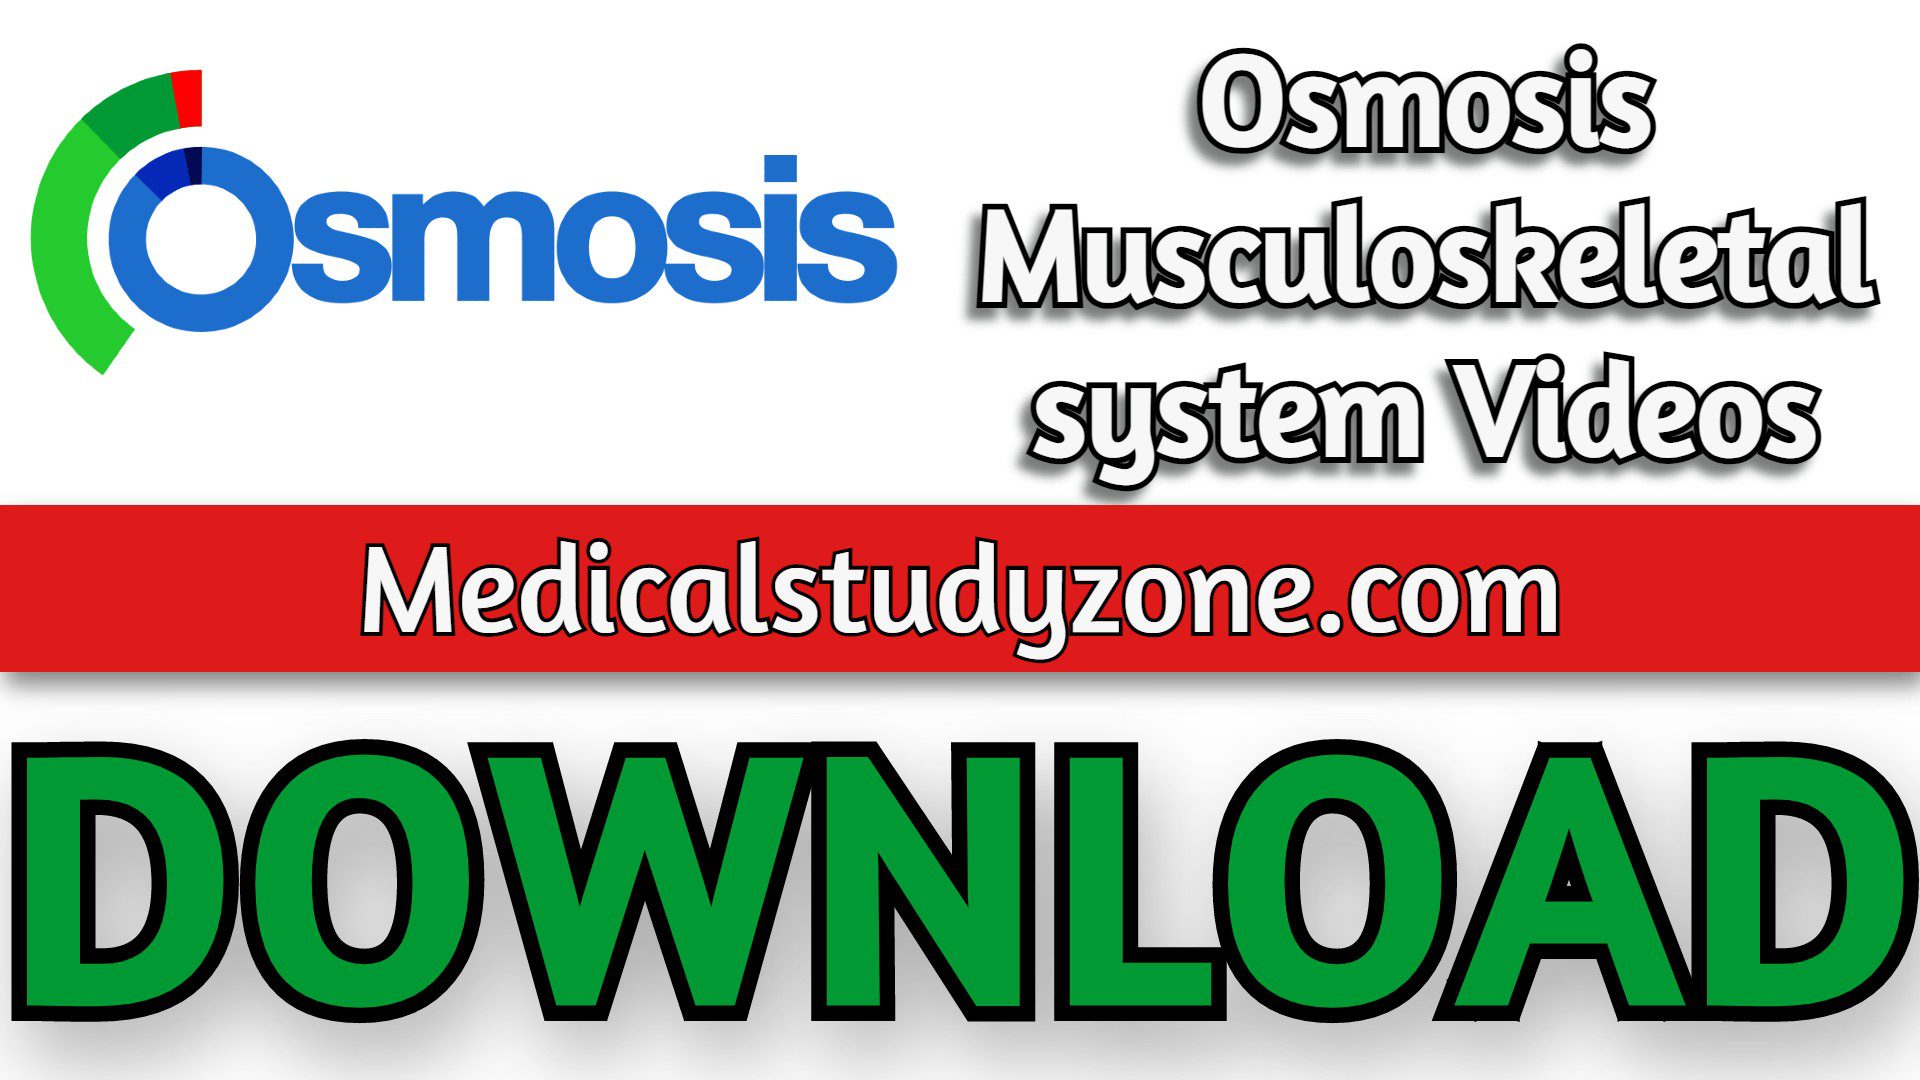 Osmosis Musculoskeletal system Videos 2023 Free Download